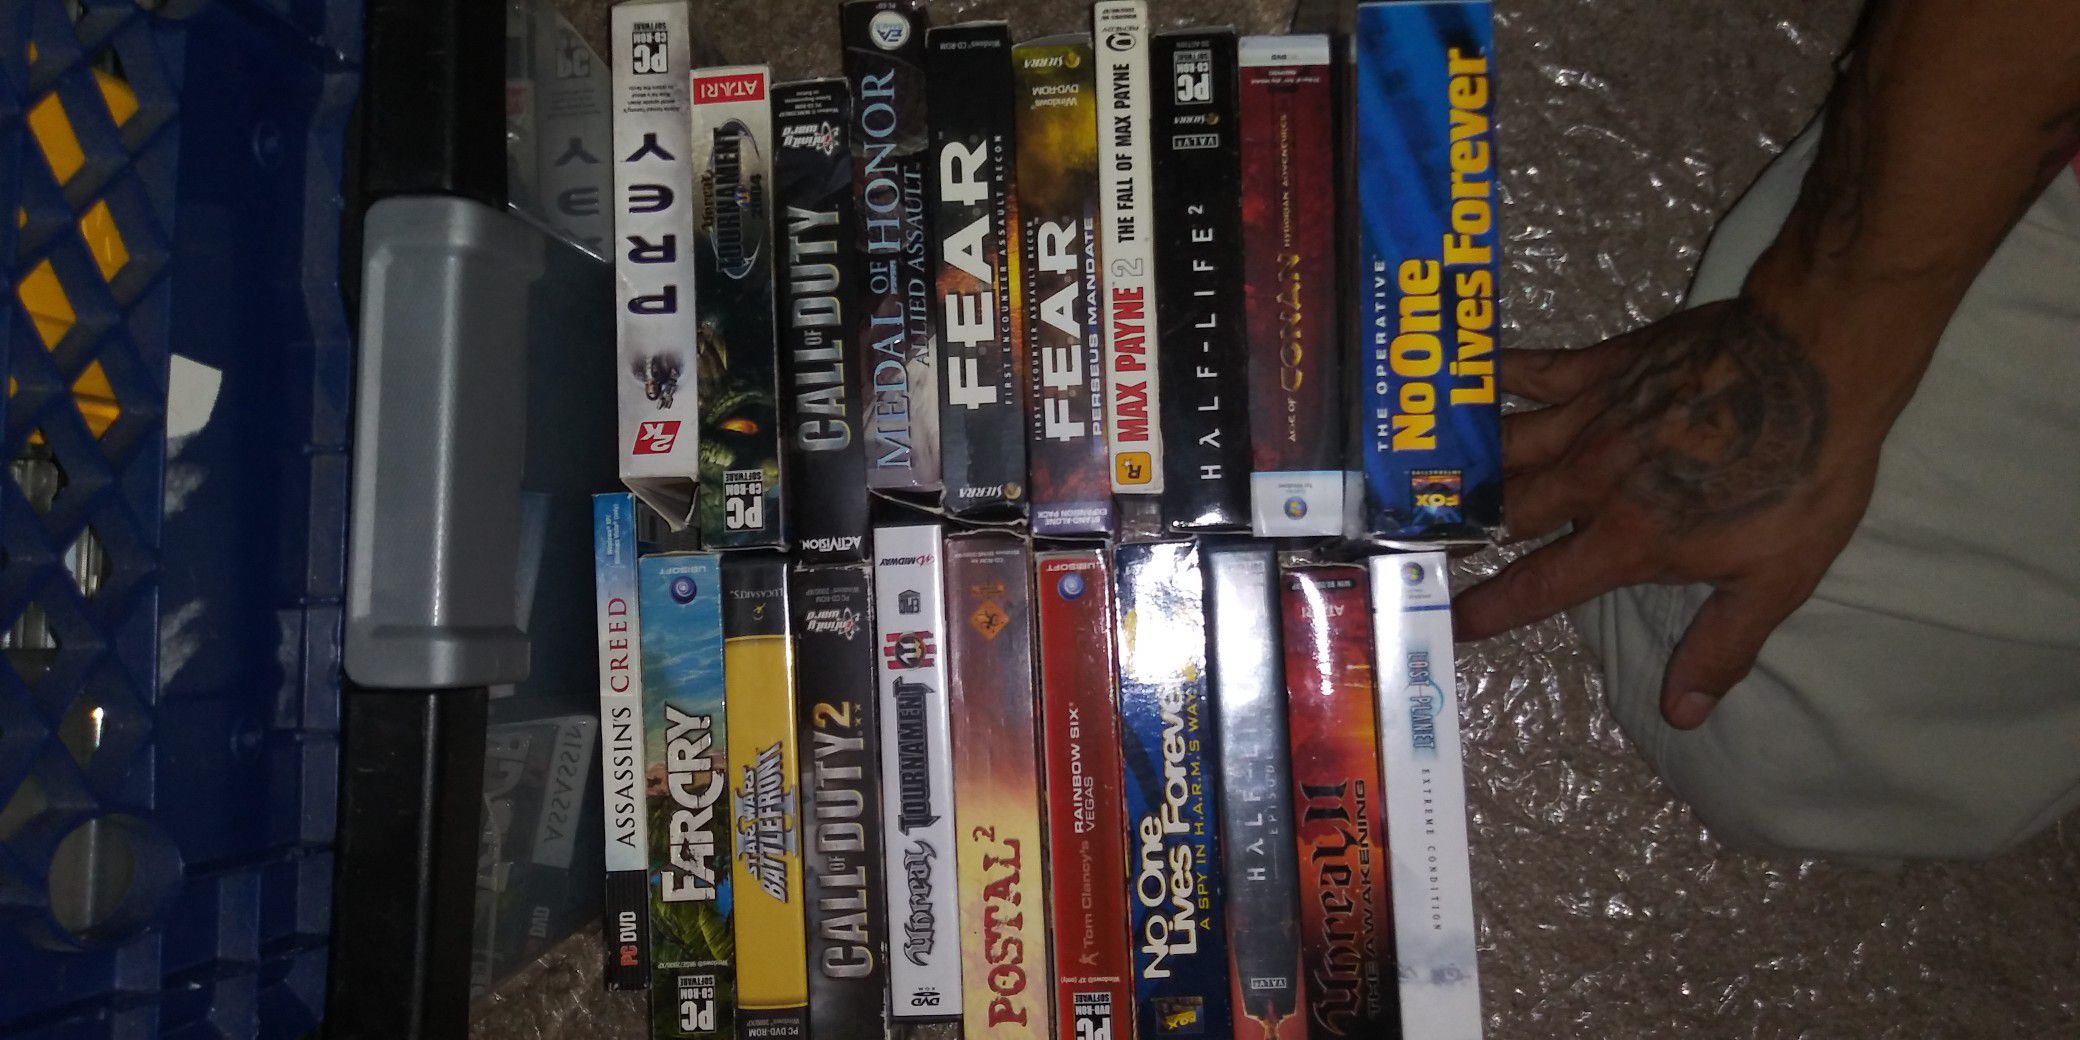 PC / Computer Games